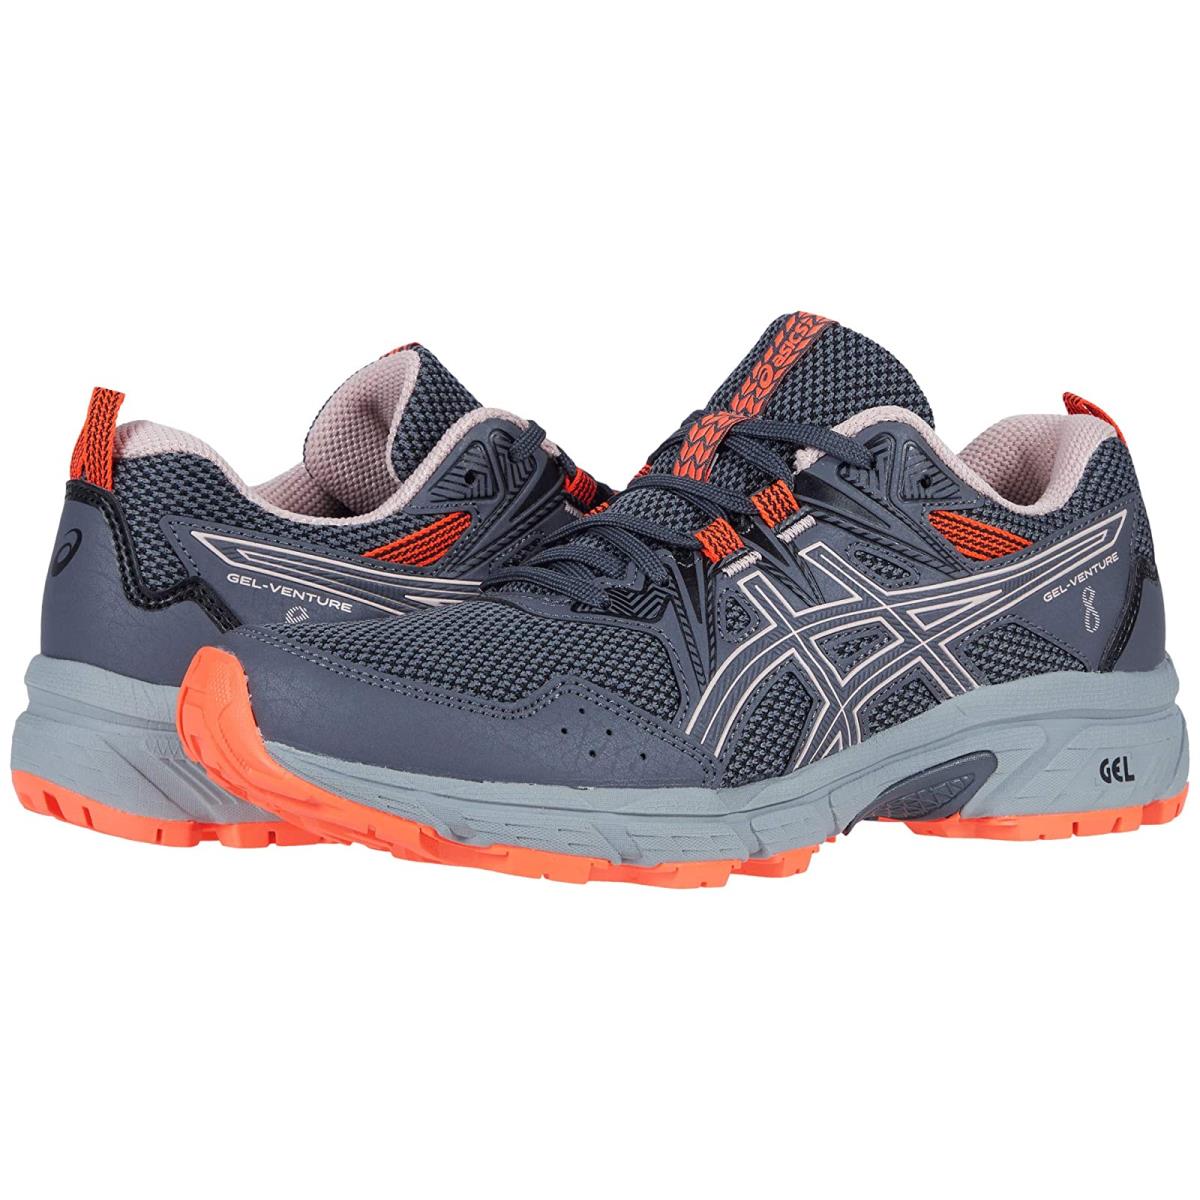 Woman`s Sneakers Athletic Shoes Asics Gel-venture 8 Carrier Grey/Ginger Peach